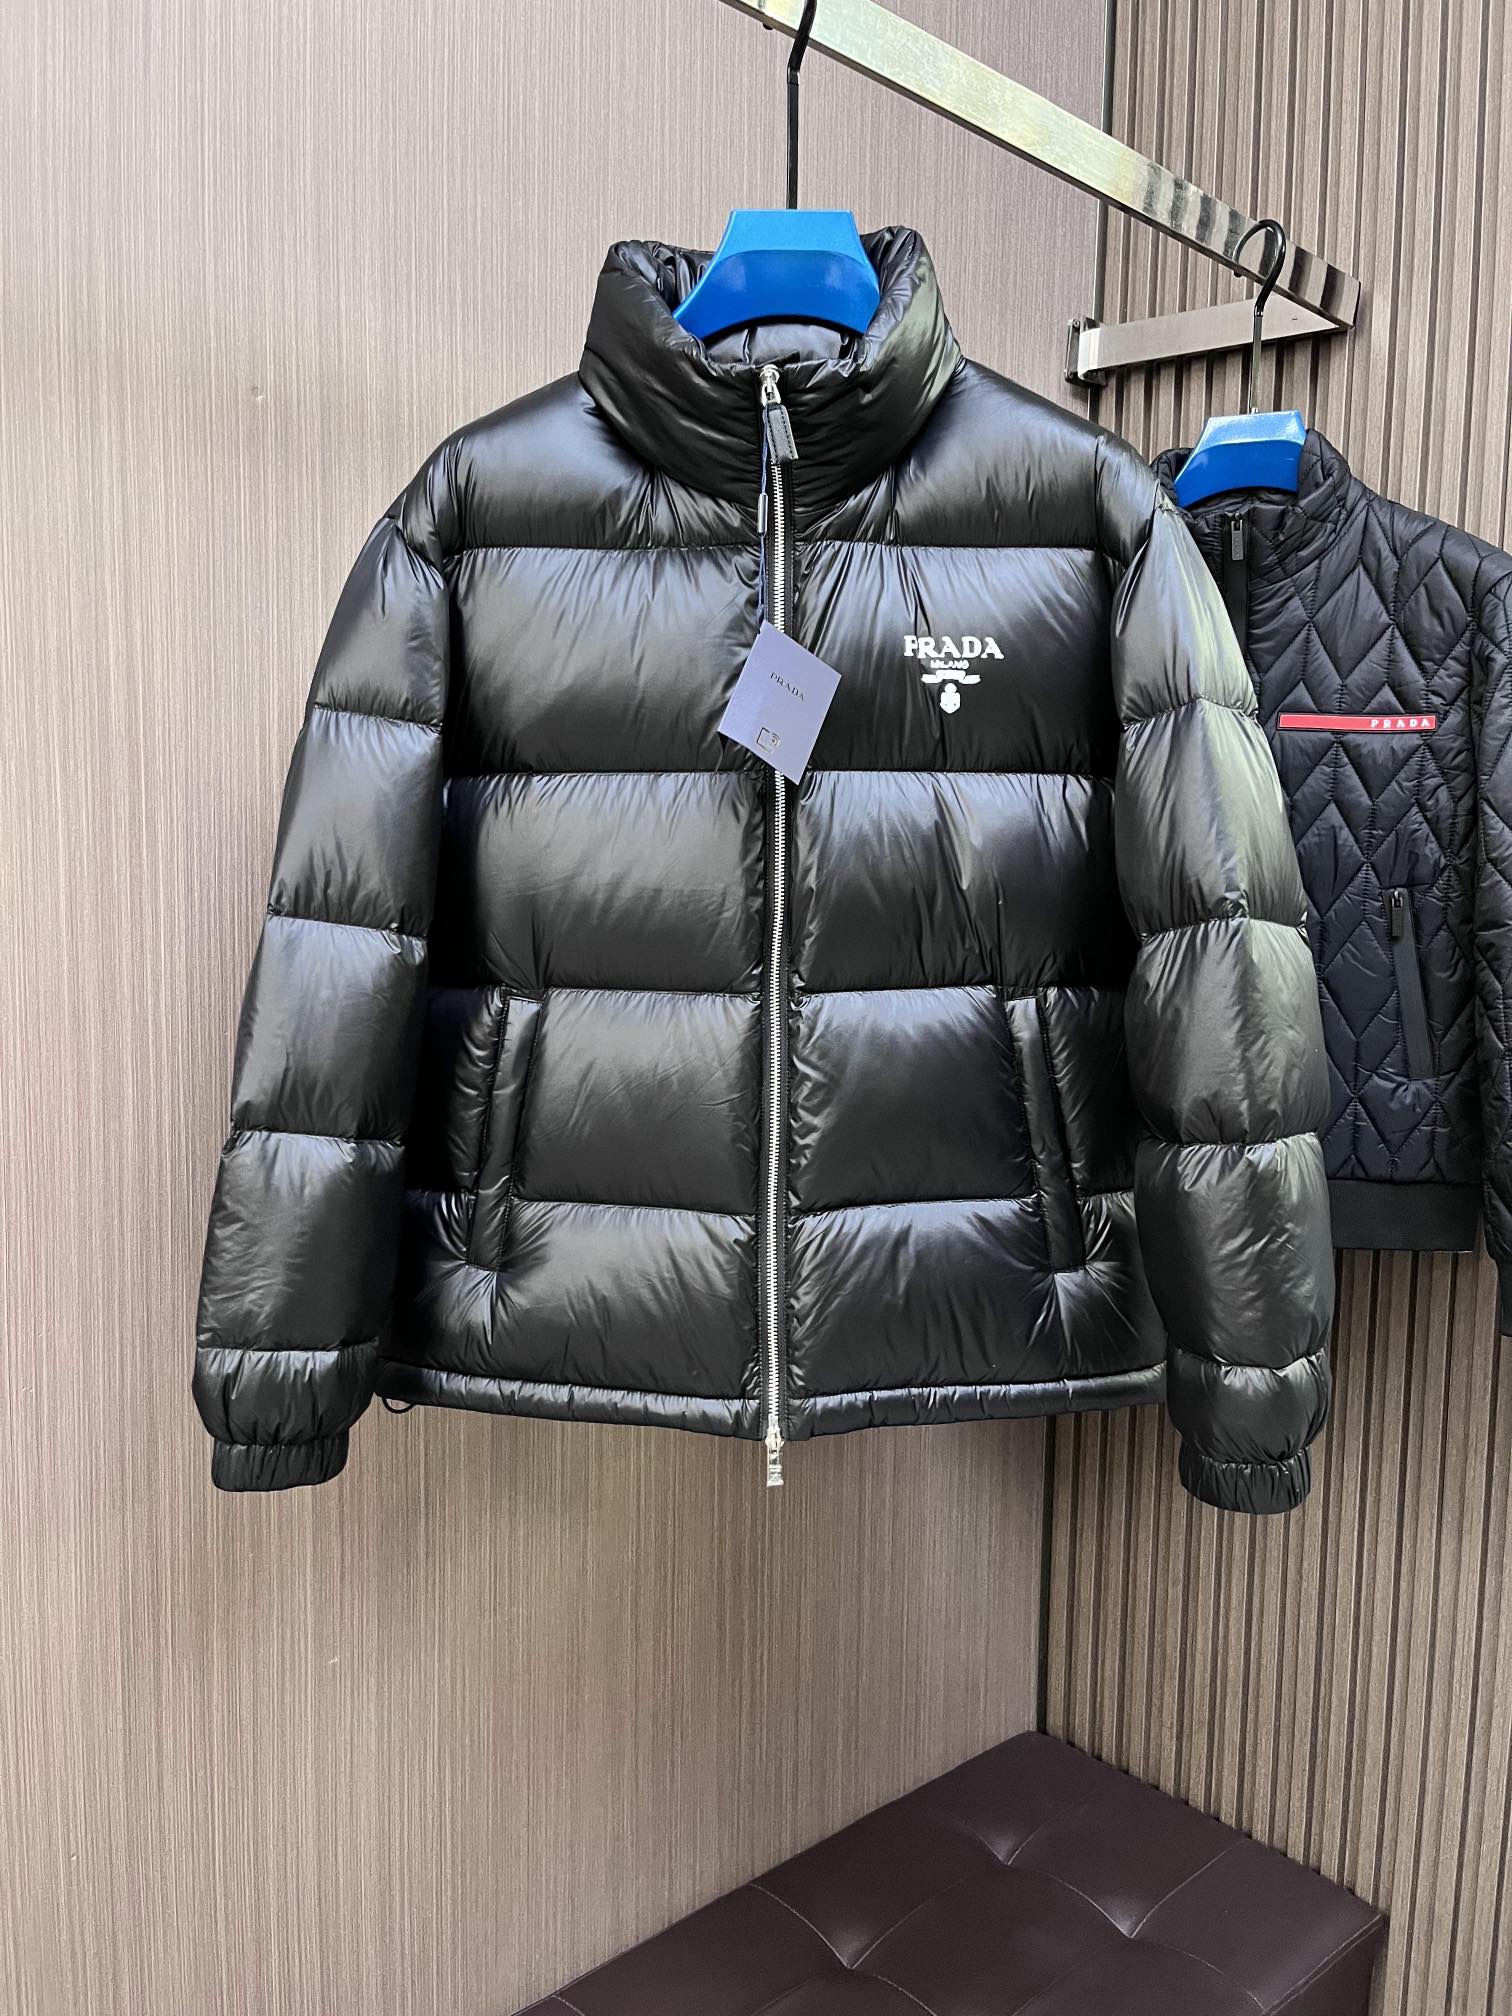 The Top Ultimate Knockoff
 Prada Clothing Down Jacket Fall/Winter Collection Fashion Casual